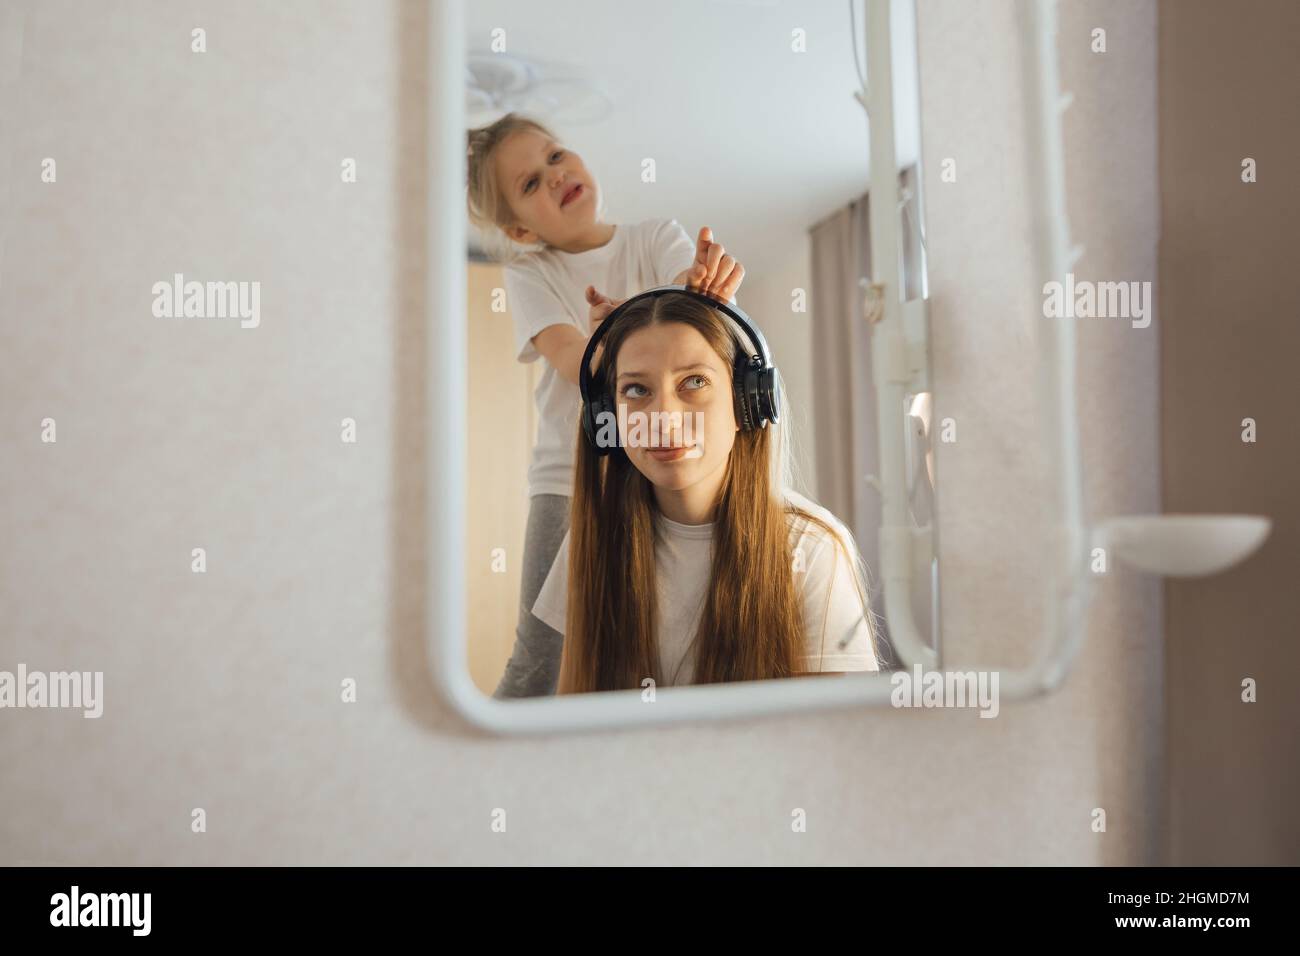 Teenage girl in headphones in front of a mirror, little sister interferes, grimaces. Stock Photo